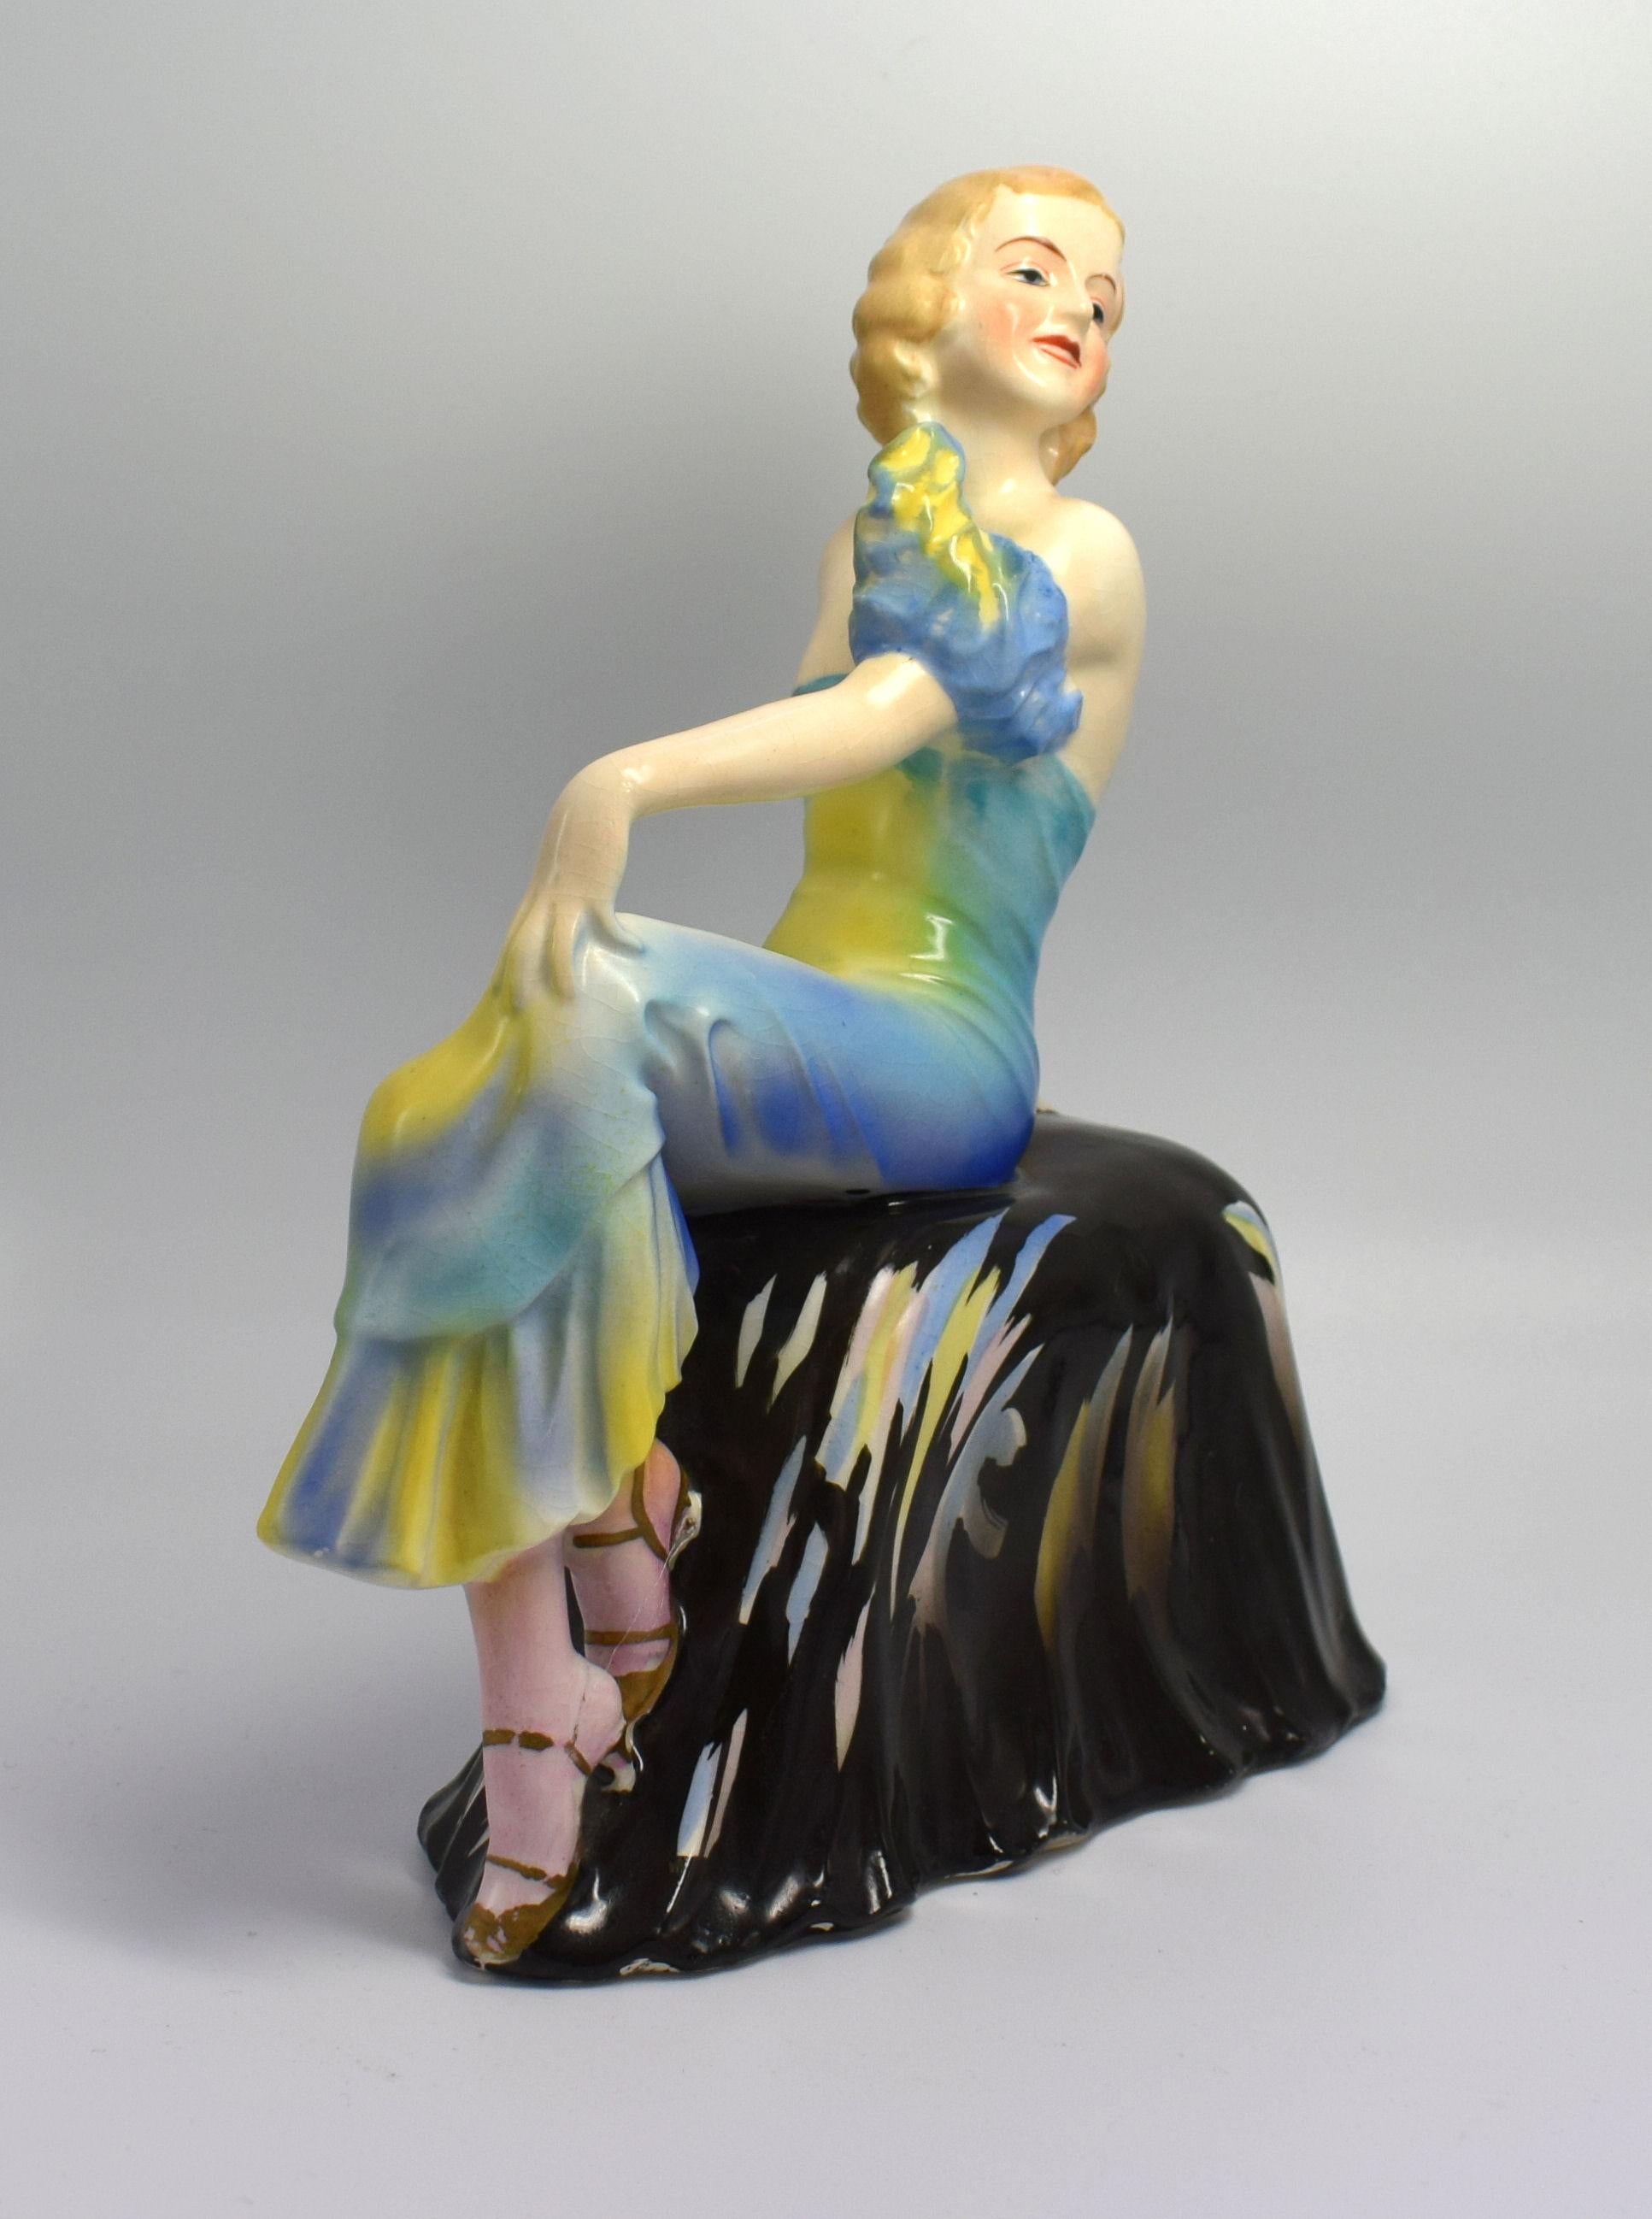 A beautiful, elegant, stylish, Art Deco lady figurine seated on a draped seat. She is in excellent condition with no cracks, chips or restoration. There is some crazing to the glaze, which can be seen on very close inspection. She's been very